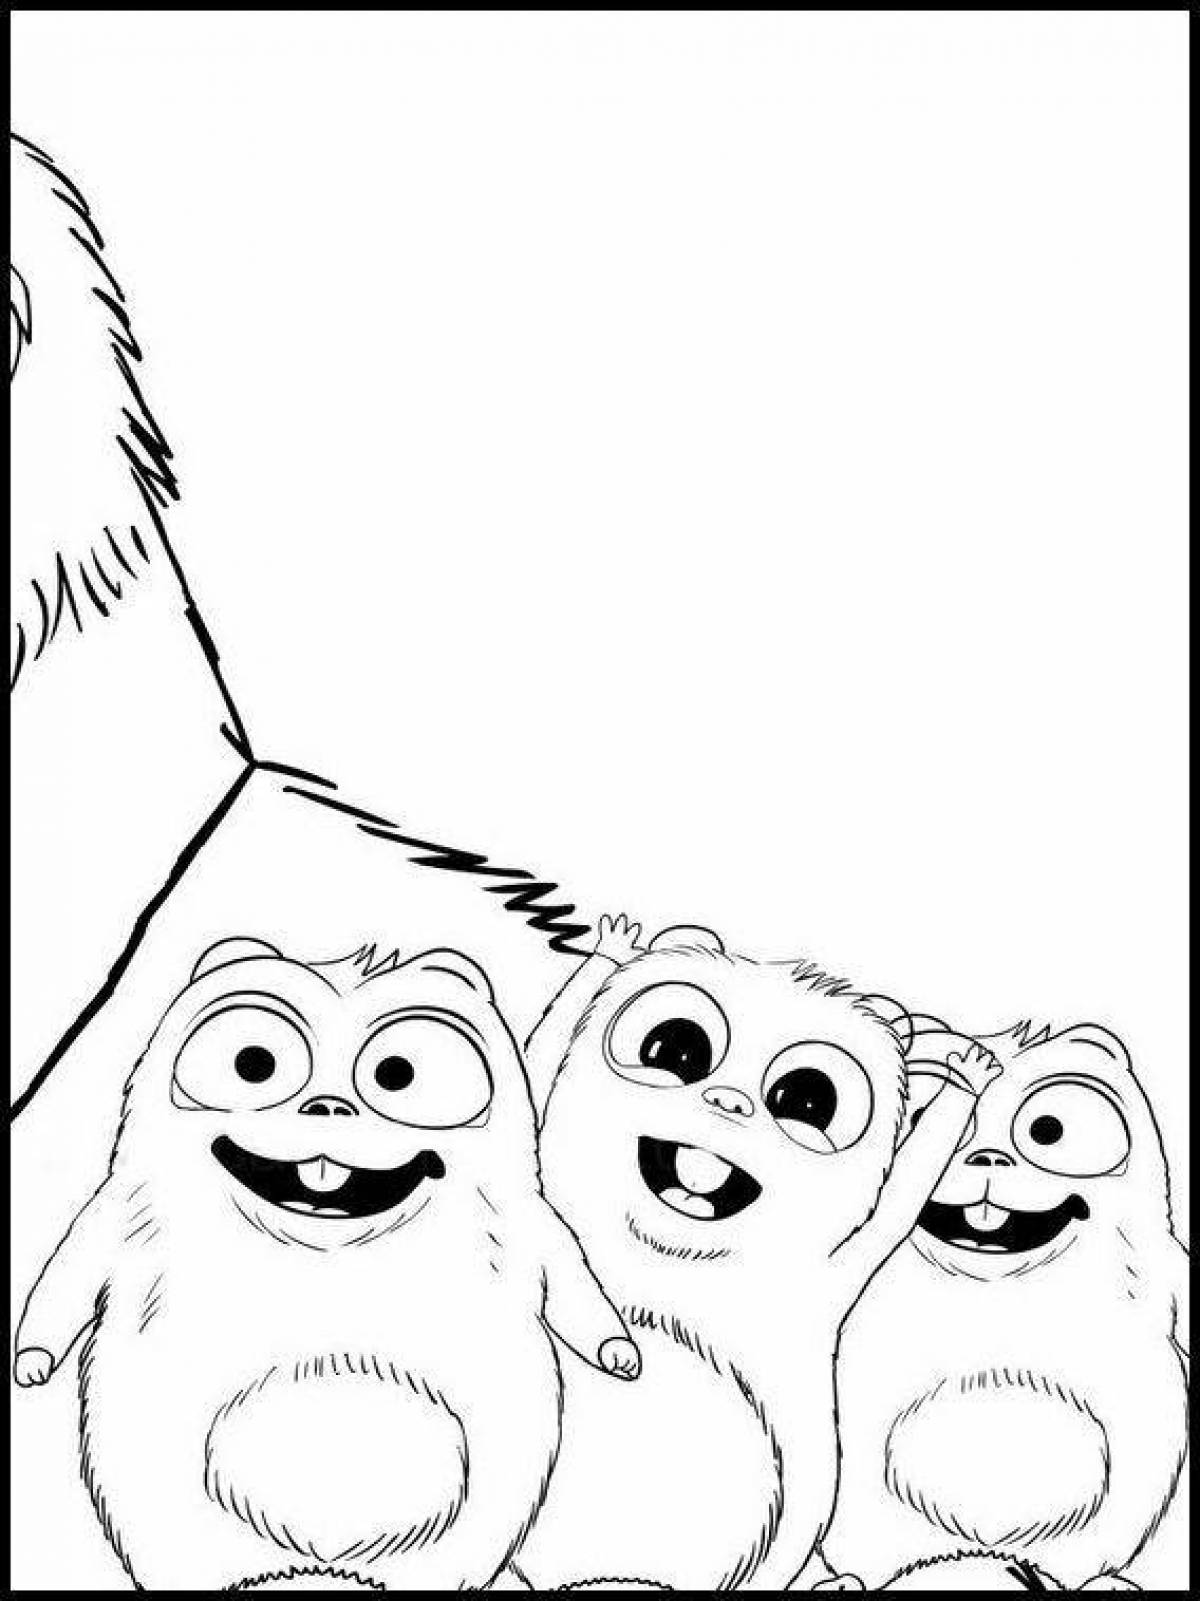 Funny grizzlies and lemmings coloring page